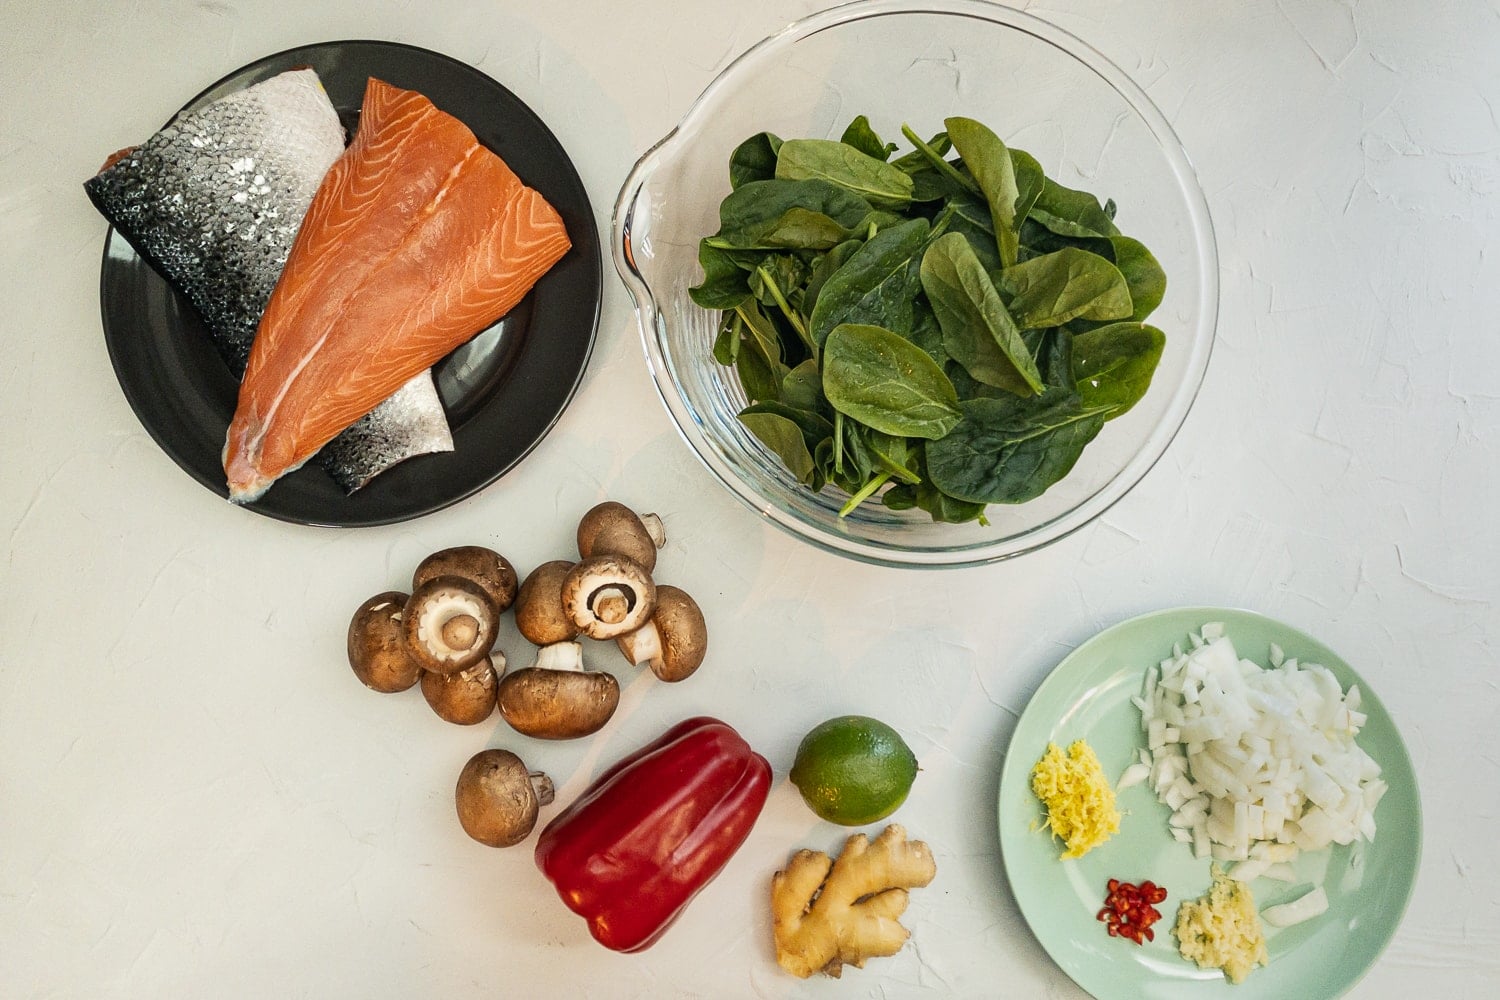 Ingredients for pan seared salmon in creamy coconut sauce